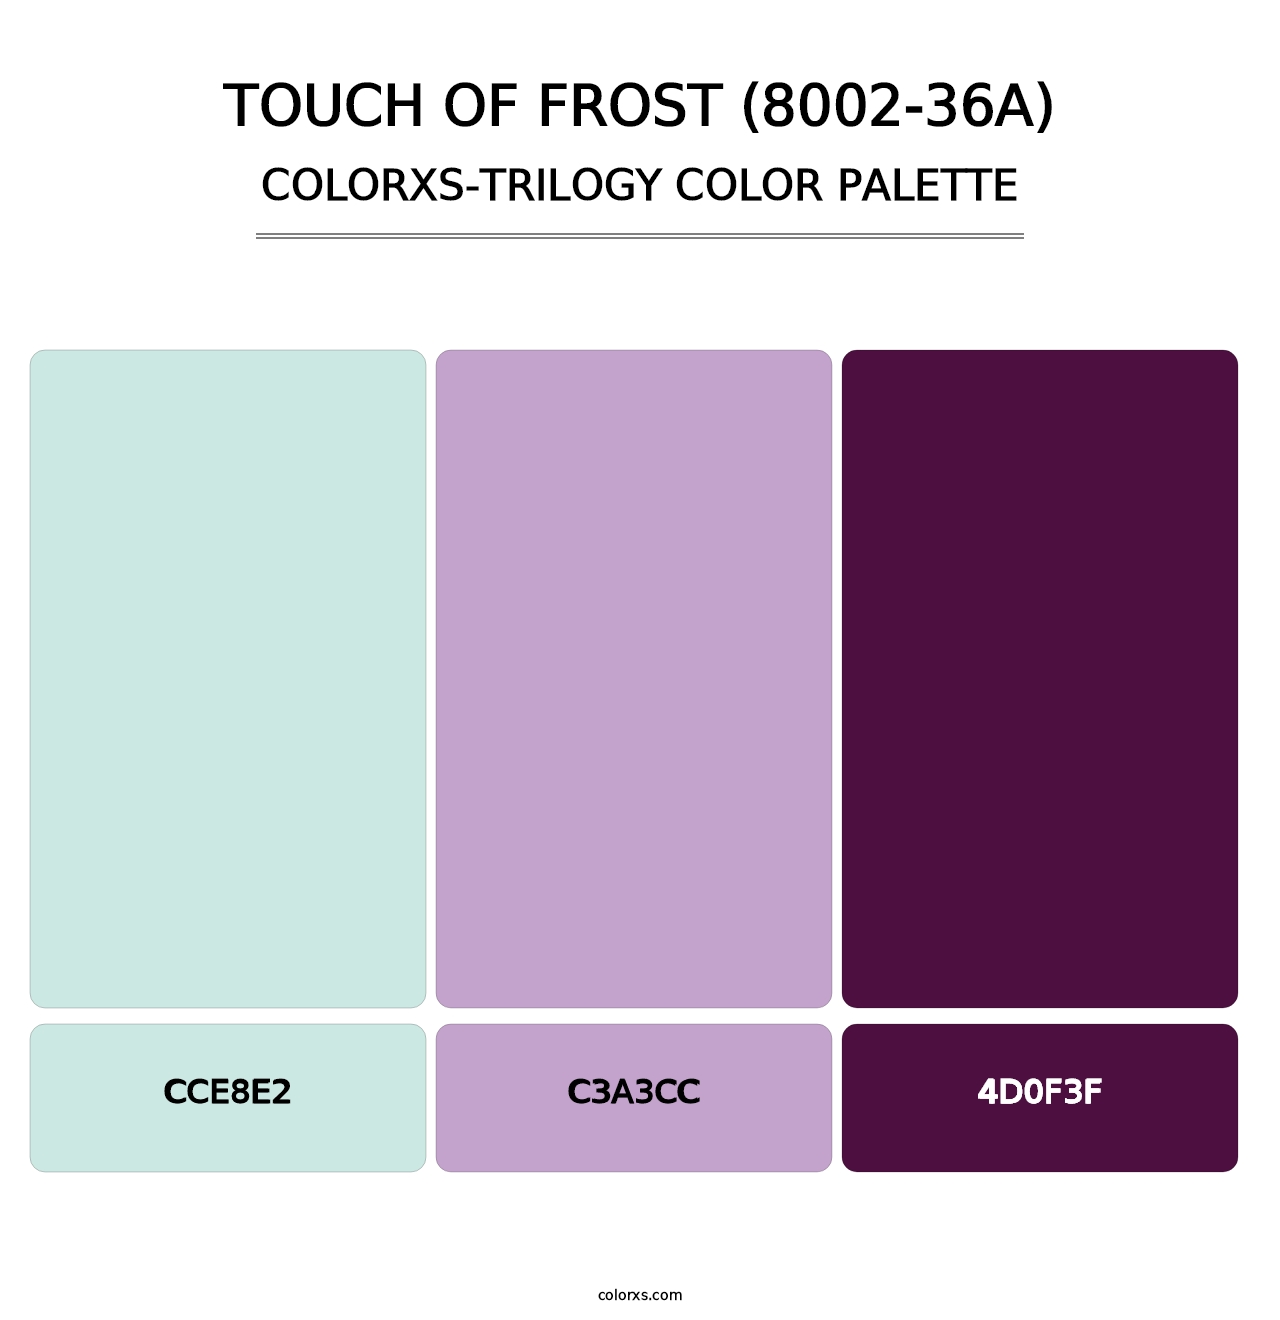 Touch of Frost (8002-36A) - Colorxs Trilogy Palette